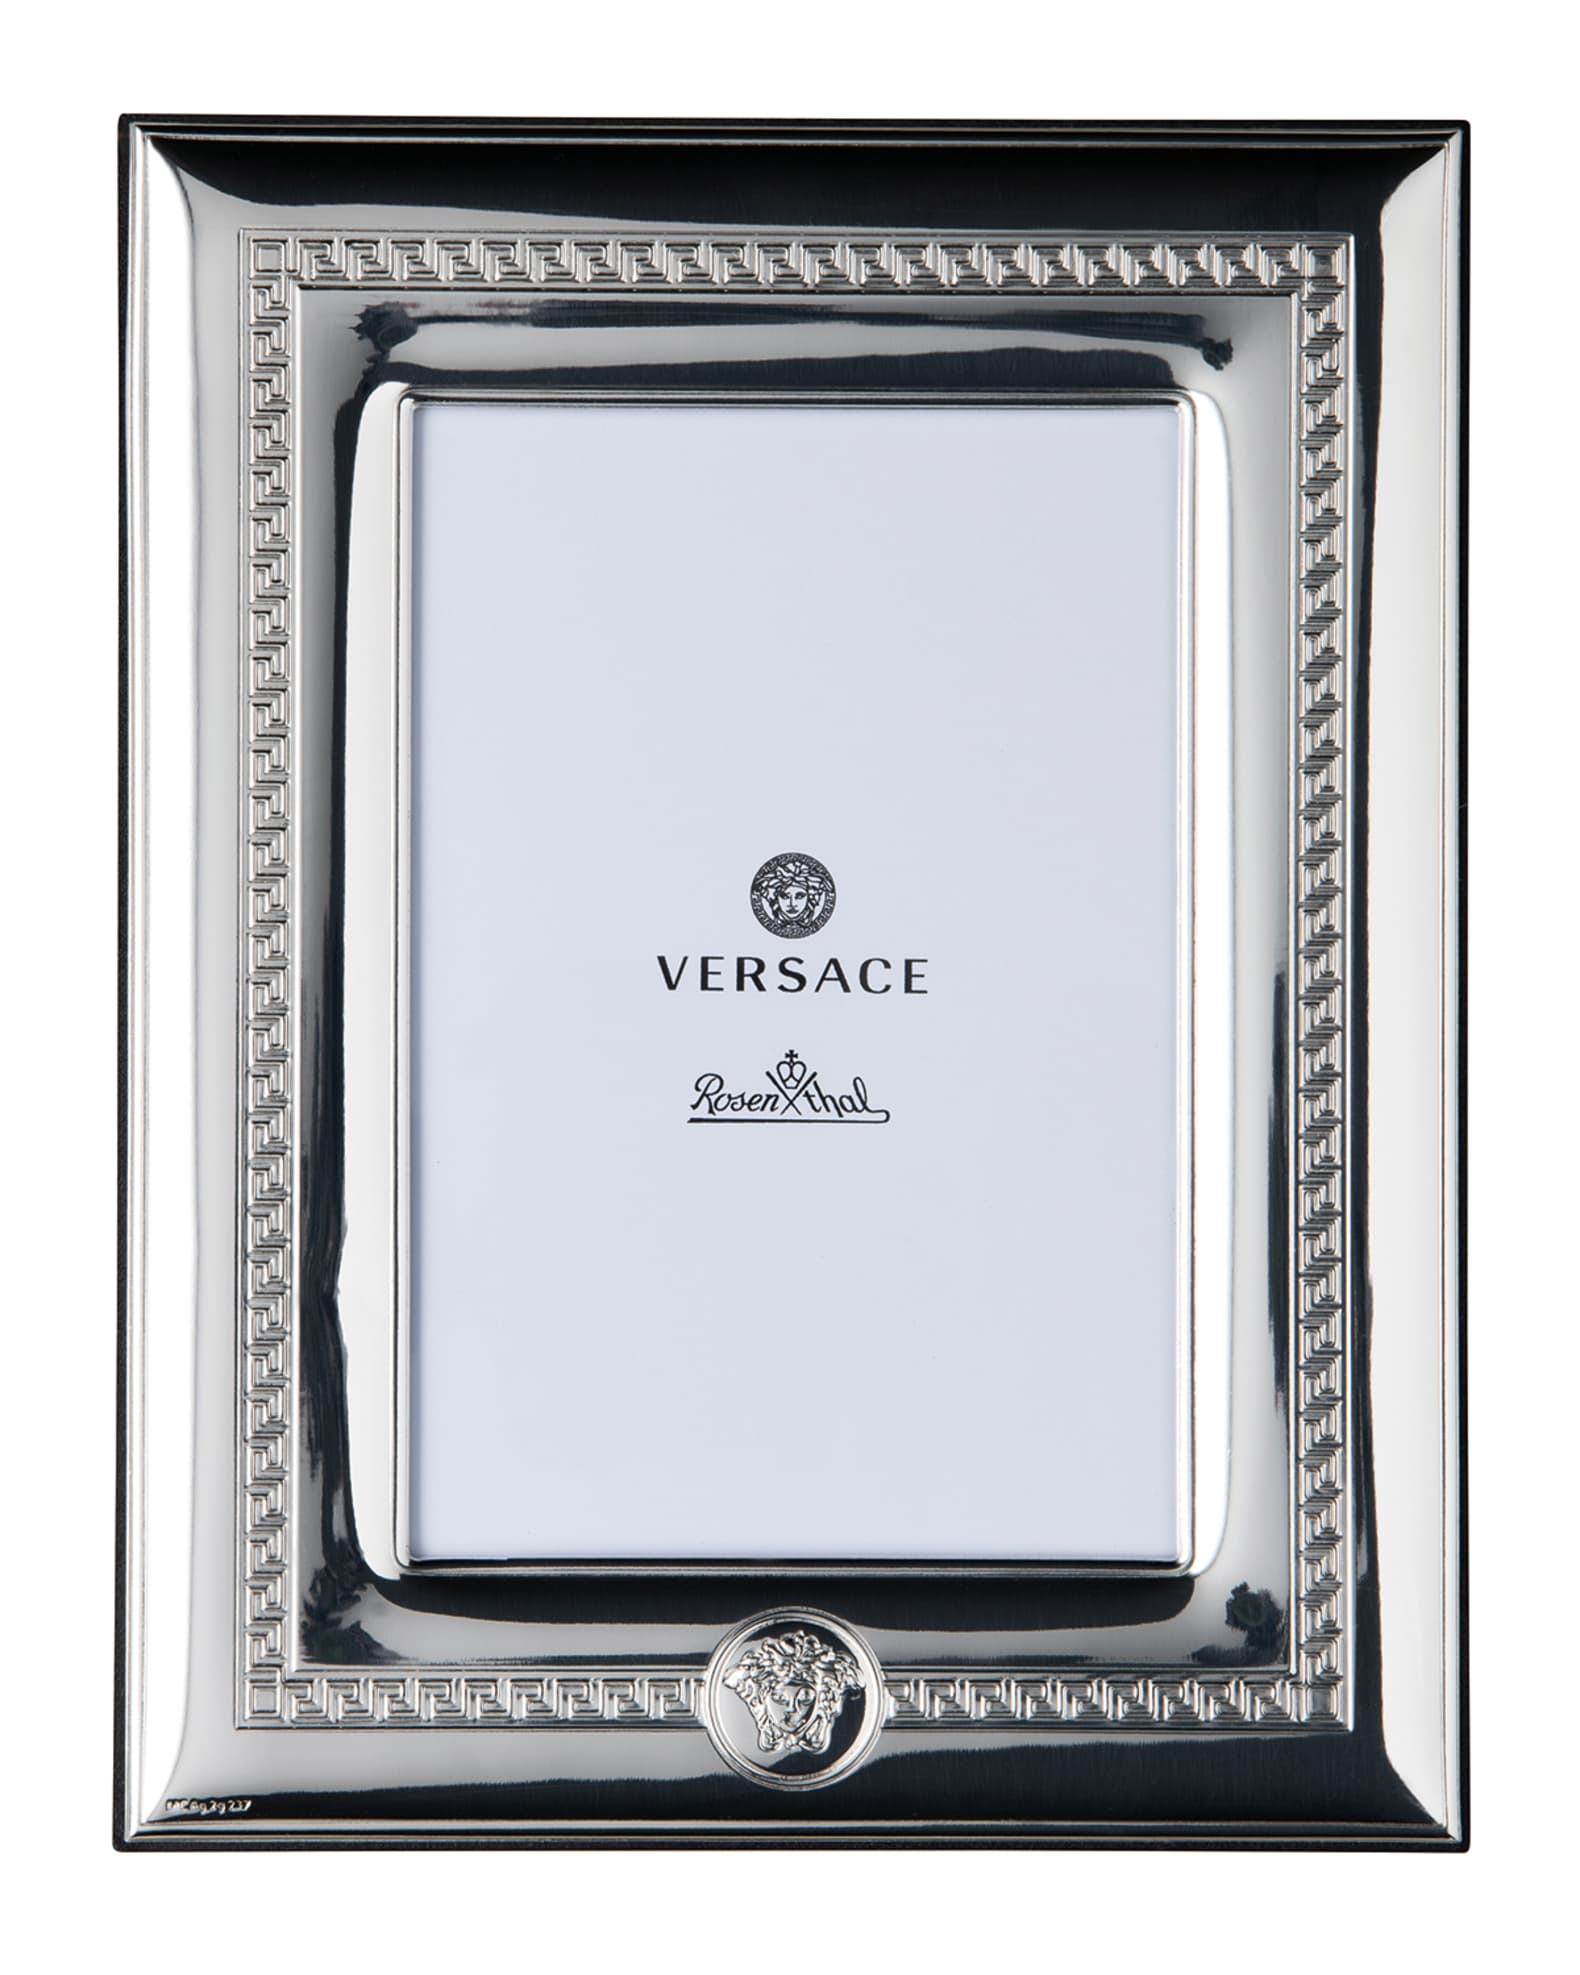 Silver-Plated Picture Frame 4 x 6 in